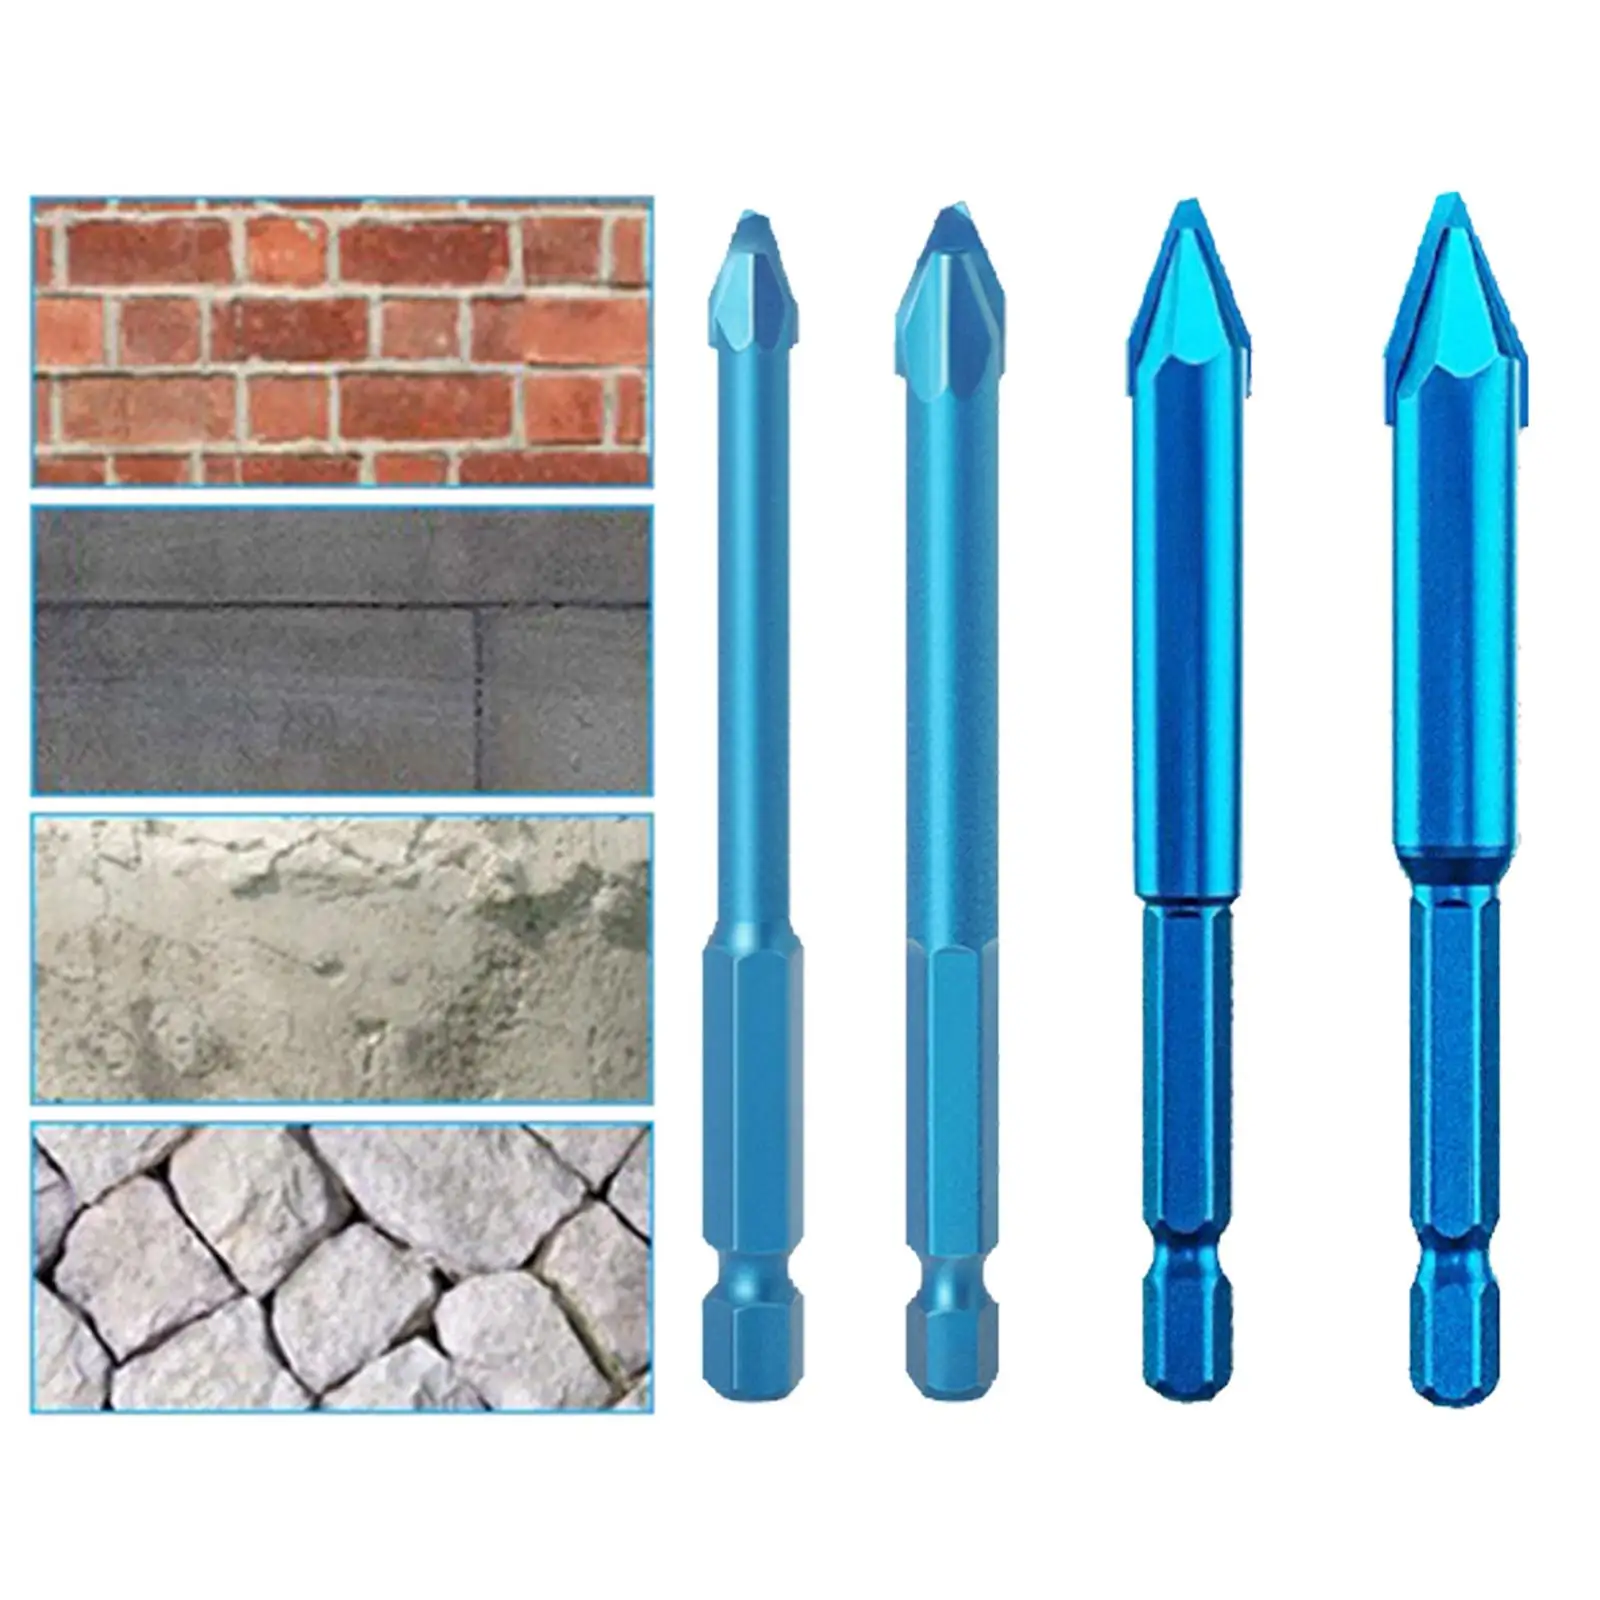 

4Pcs Tile Drills Bits Eccentric Steel Heavy Duty Drillings Power Tool Parts Hollow Drill Set Hex Shank for Granite Common Brick